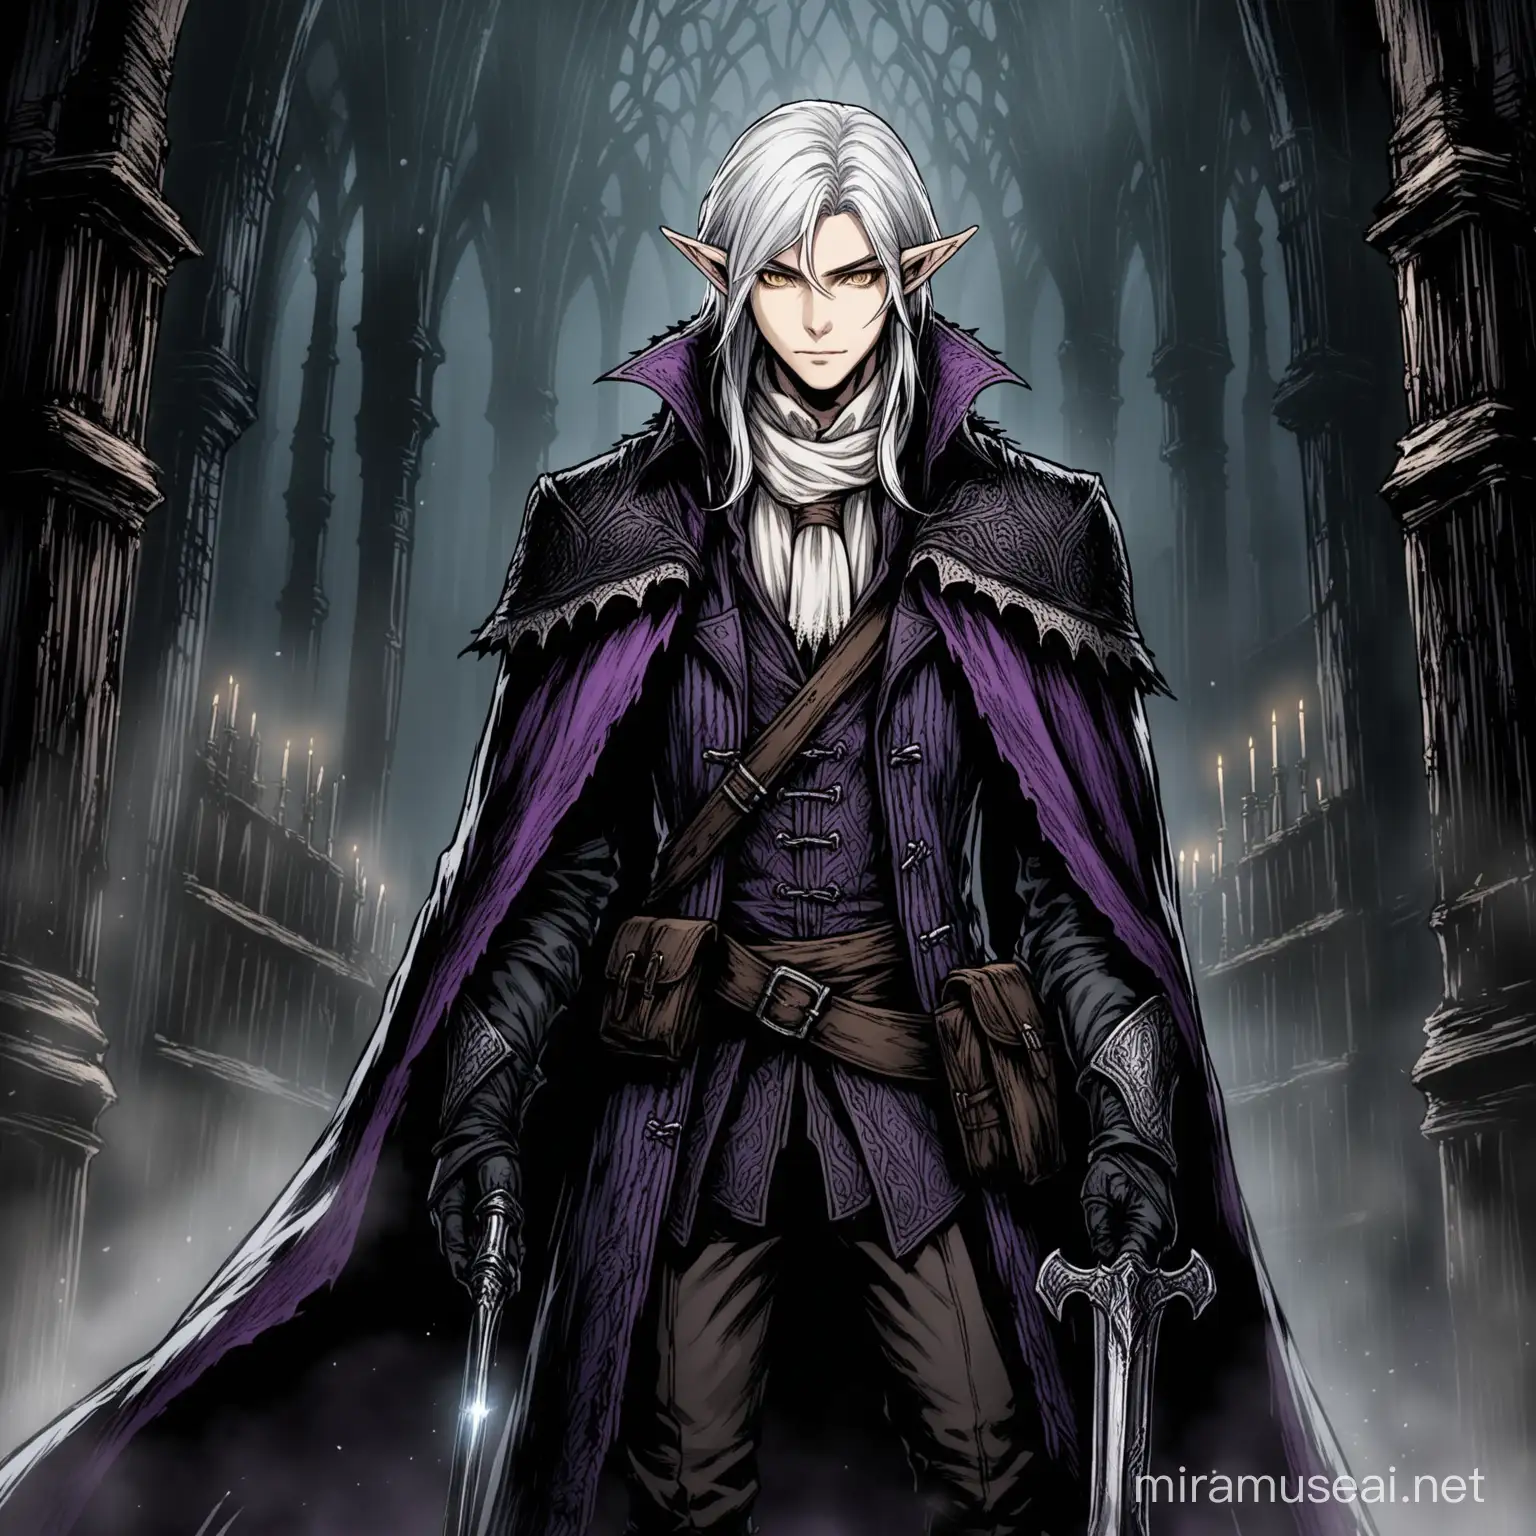 A male eldarin elf, with golden eyes, and silver white hair, dressed in color of black and purple, as a Bloodborne Hunter from the game Bloodborne.